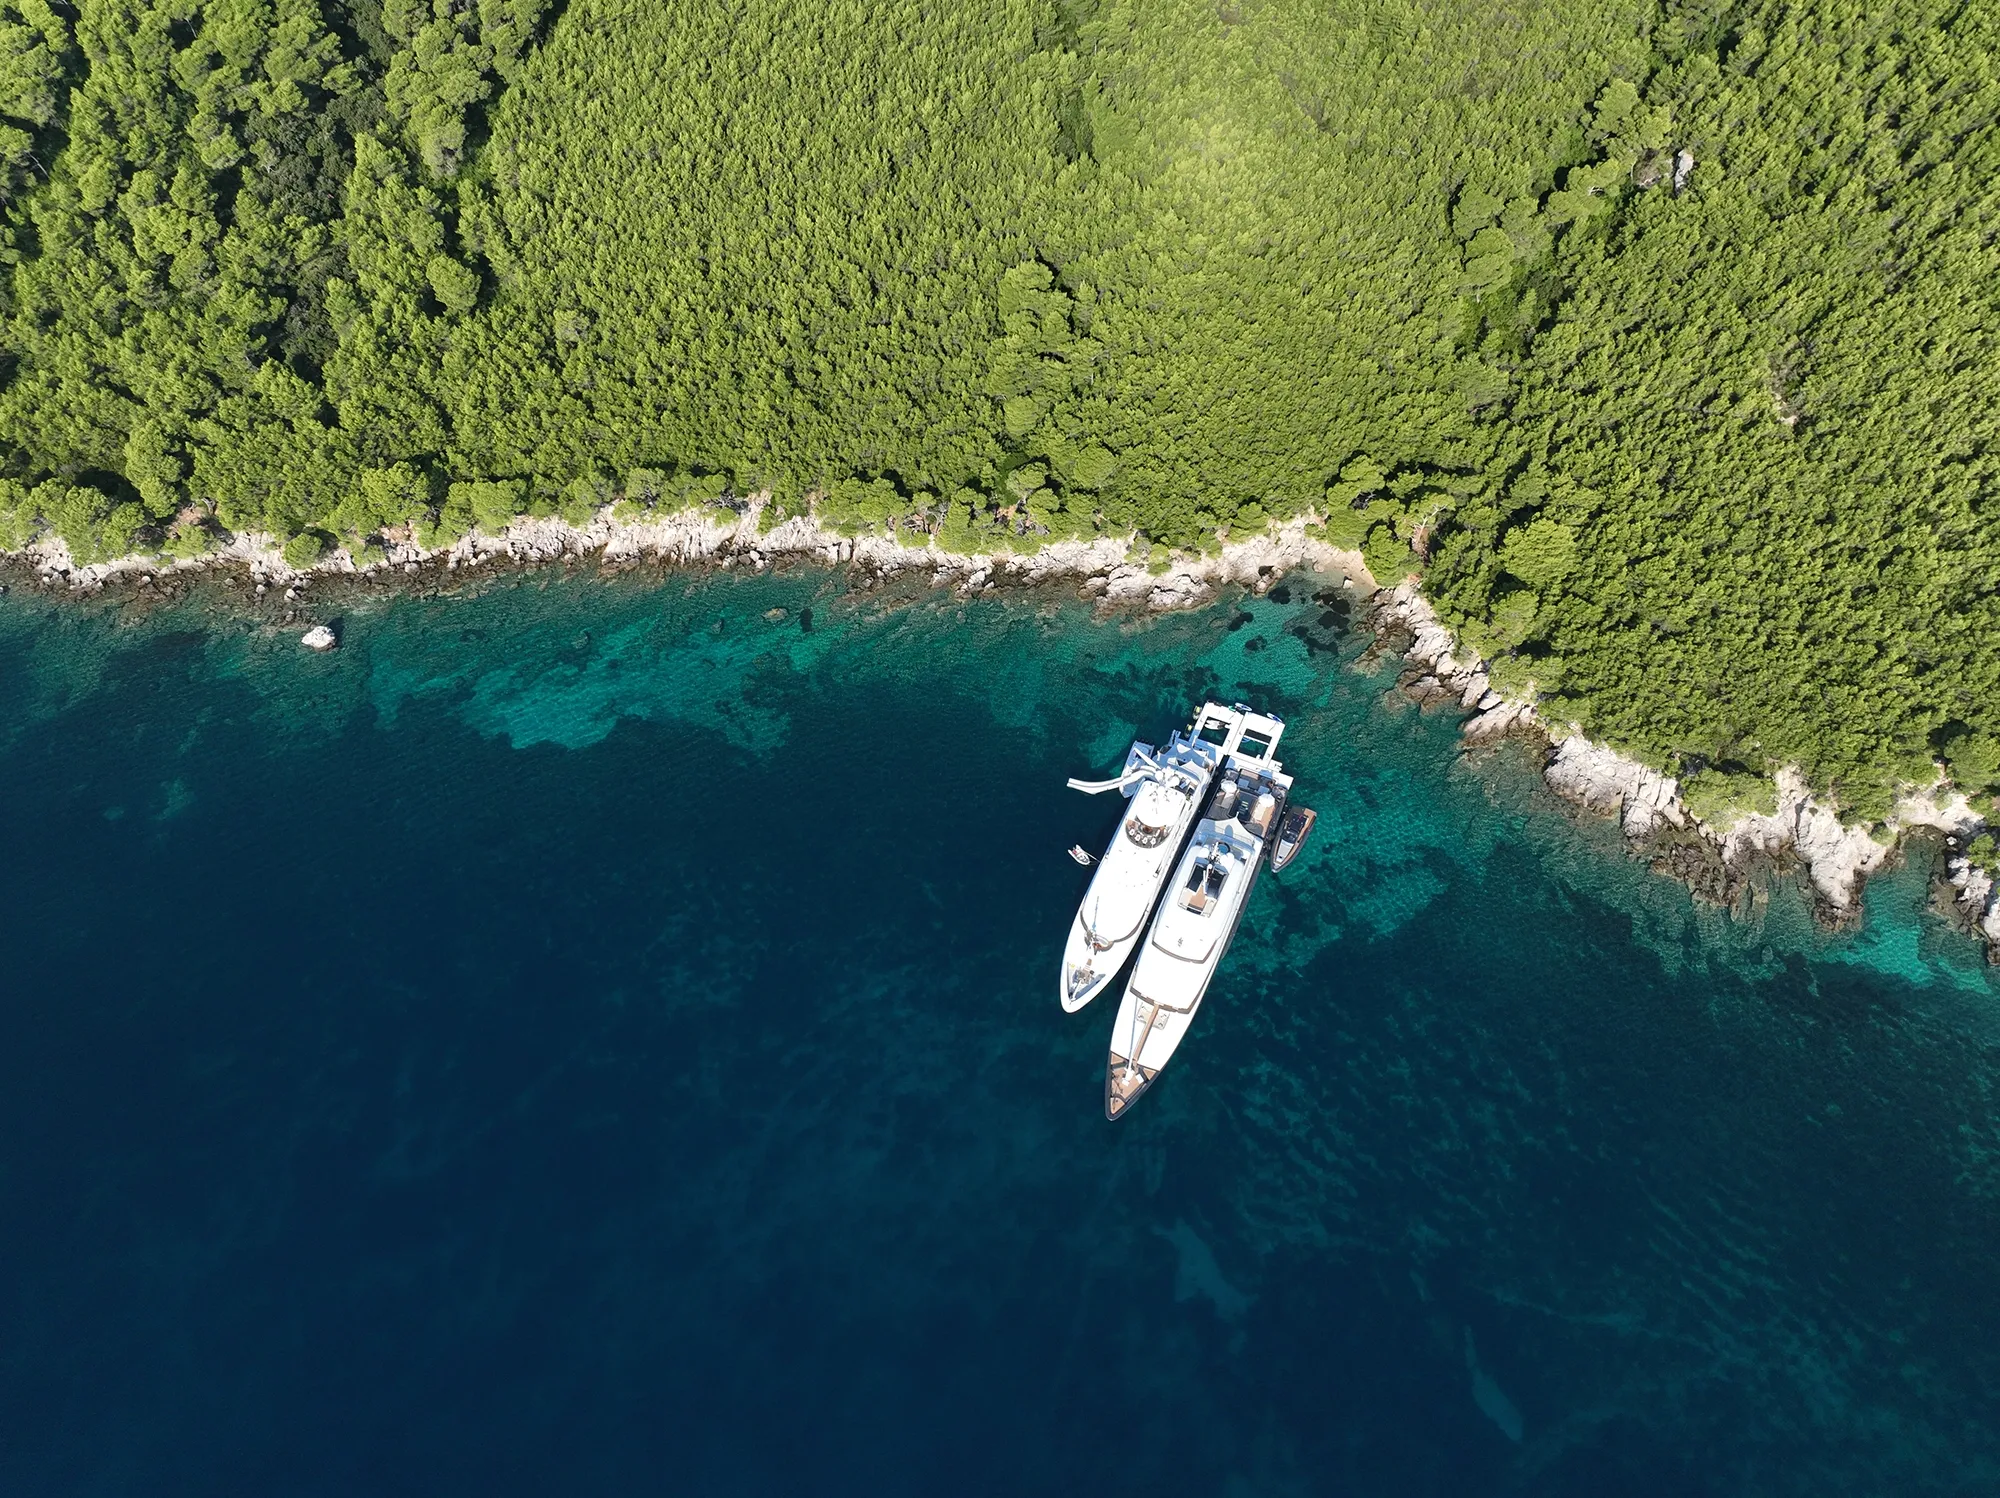 Sea Pool Yacht Slide Loungers MY Loon 221 and Loon 180 in tandem in Croatia drone view of anchorage with yachts at an angle